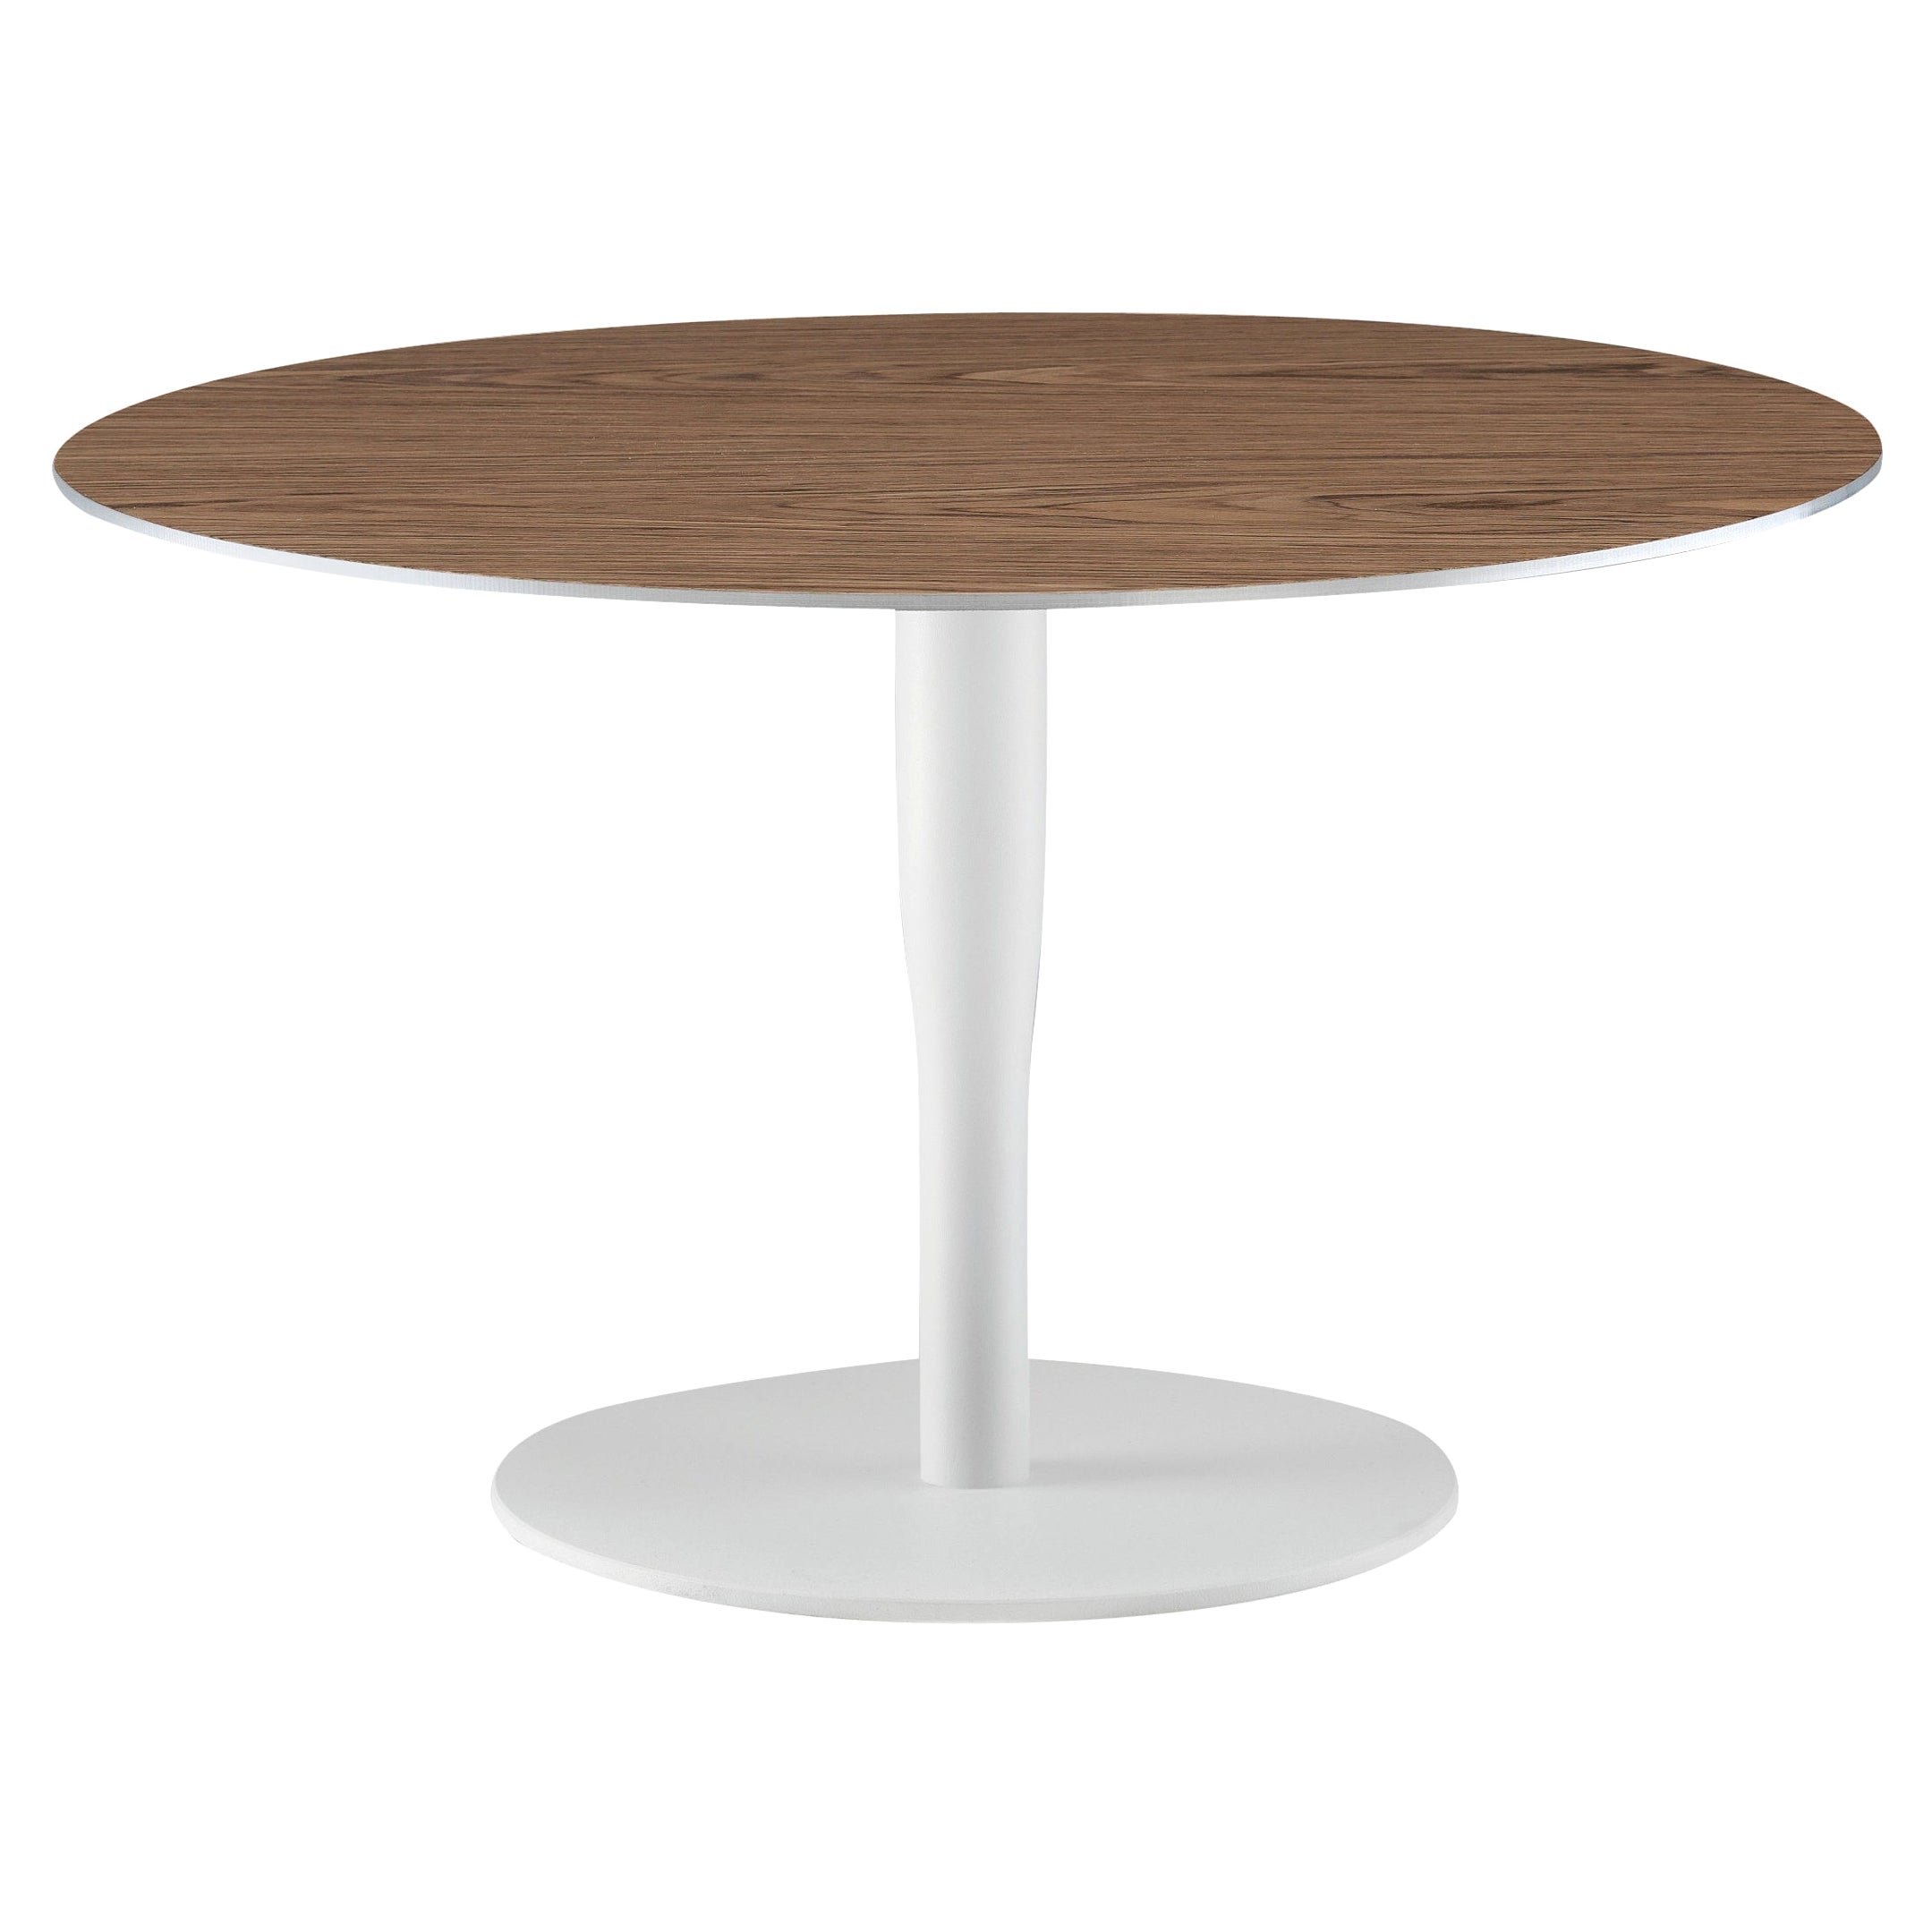 Alias Round Large Atlas Low Table I in Canaletto Walnut Oak Top & White Frame